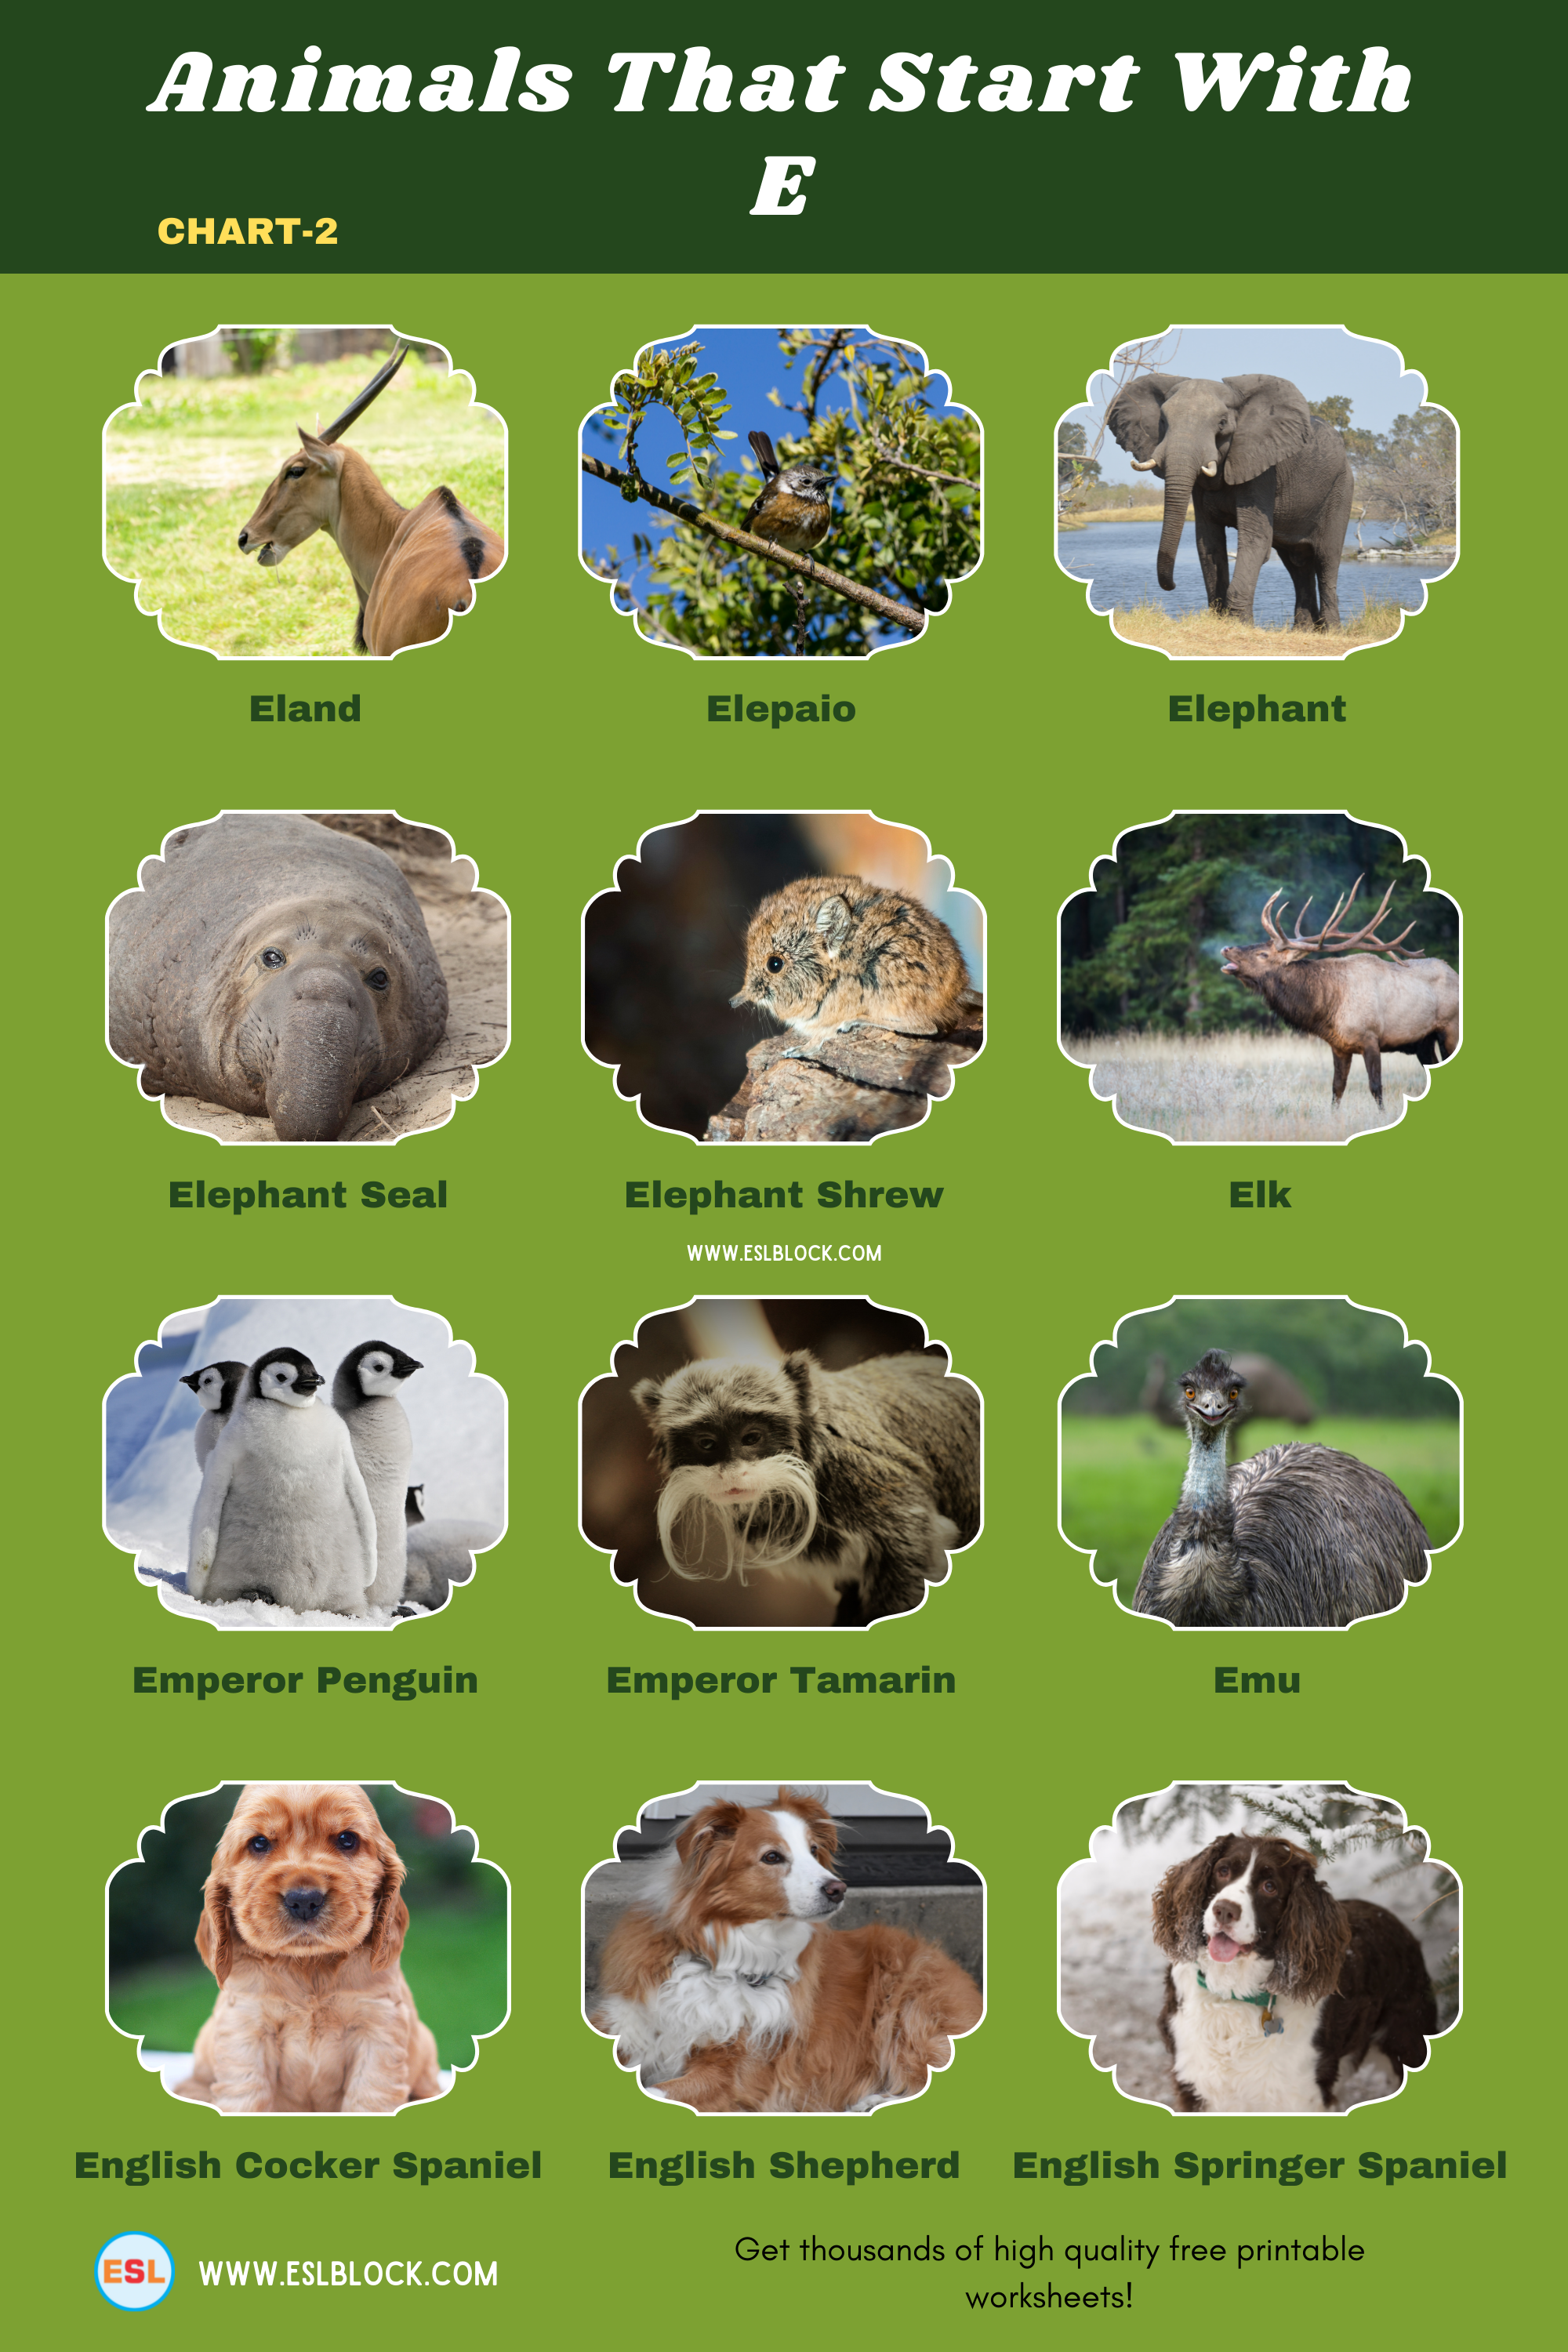 5 Letter Animals Starting With E, Animals List, Animals Names, Animals That Begins With E, Animals That Start With E, E Animals, E Animals in English, E Animals Names, English, English Nouns, English Vocabulary, English Words, List of Animals That Start With E, Nouns, Vocabulary